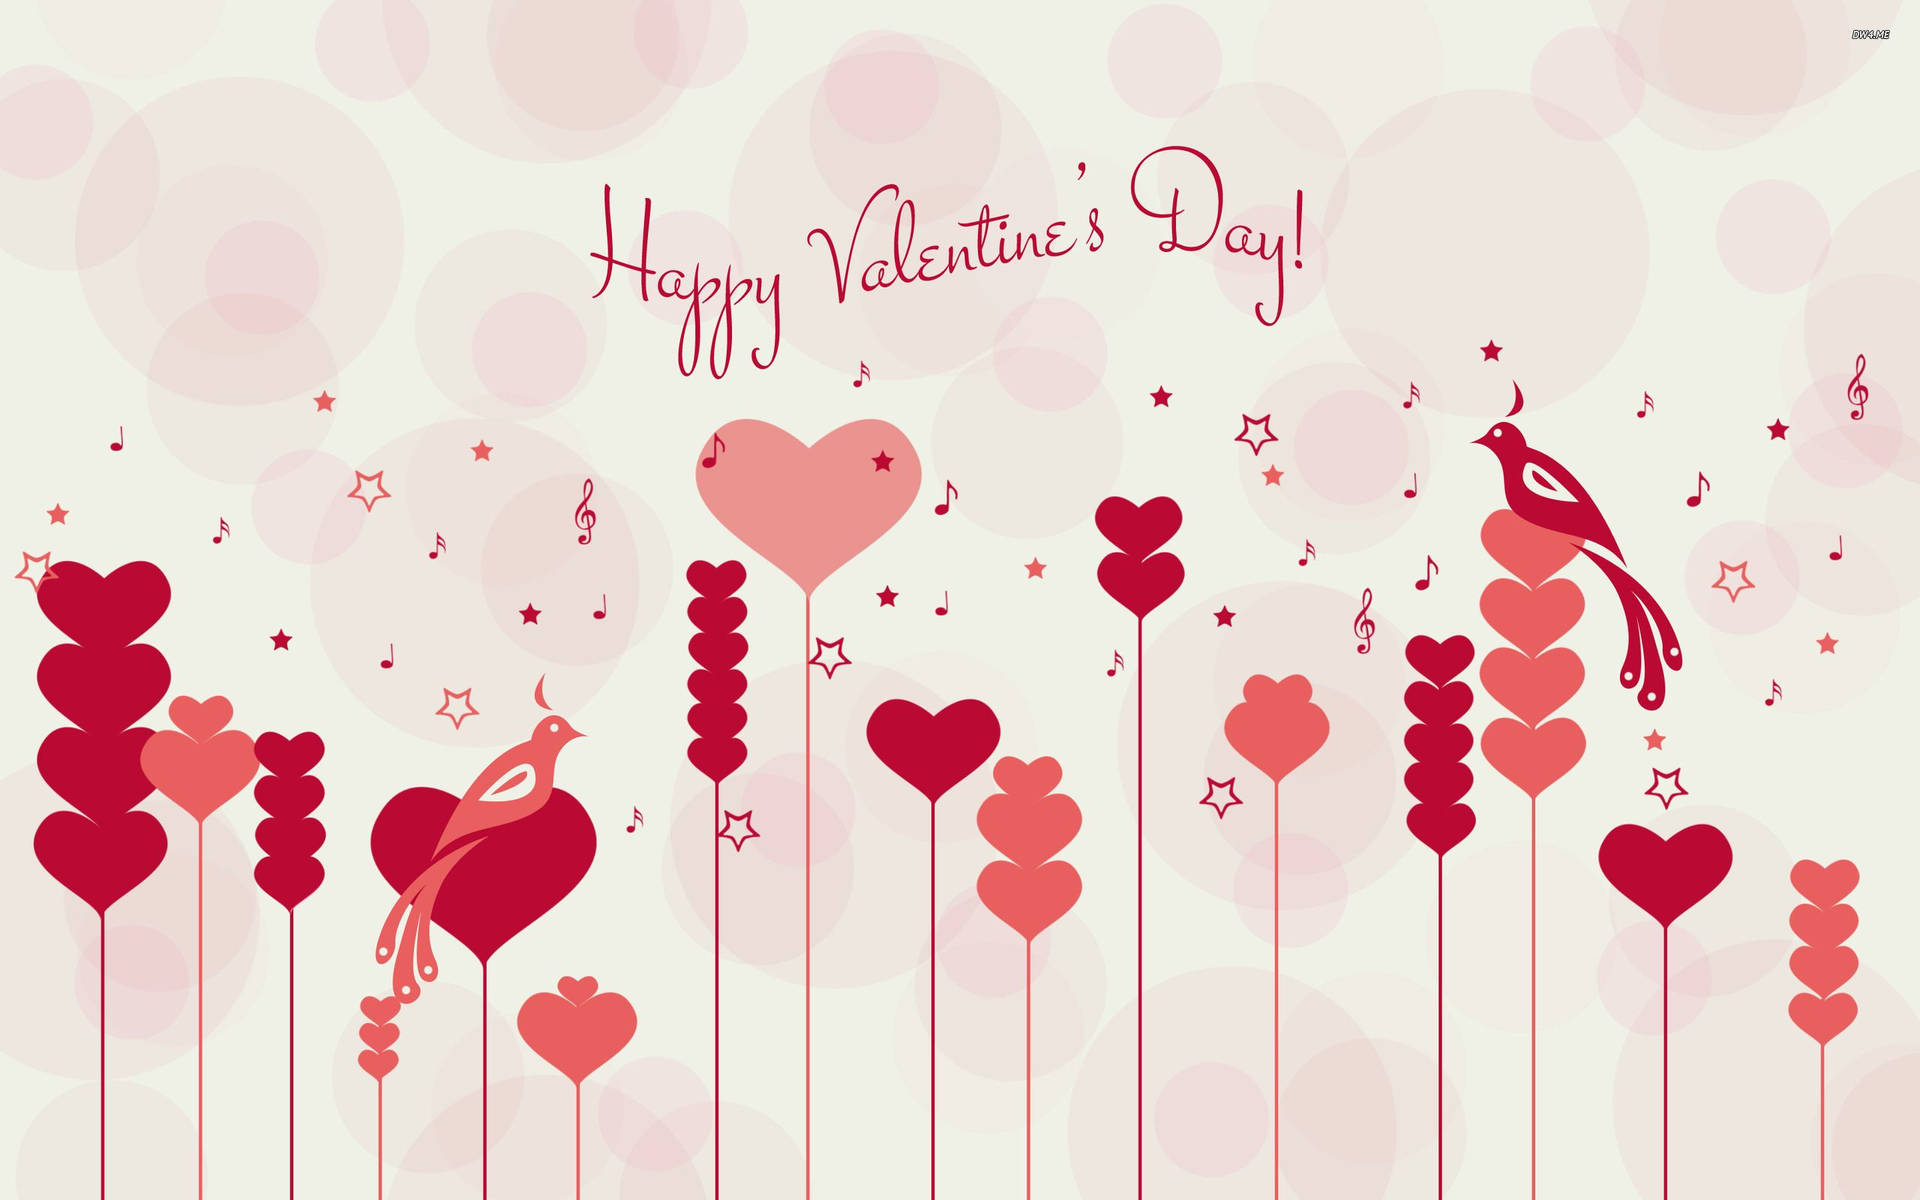 Free Cute Valentines Day Wallpaper Downloads, Cute Valentines Day Wallpaper for FREE